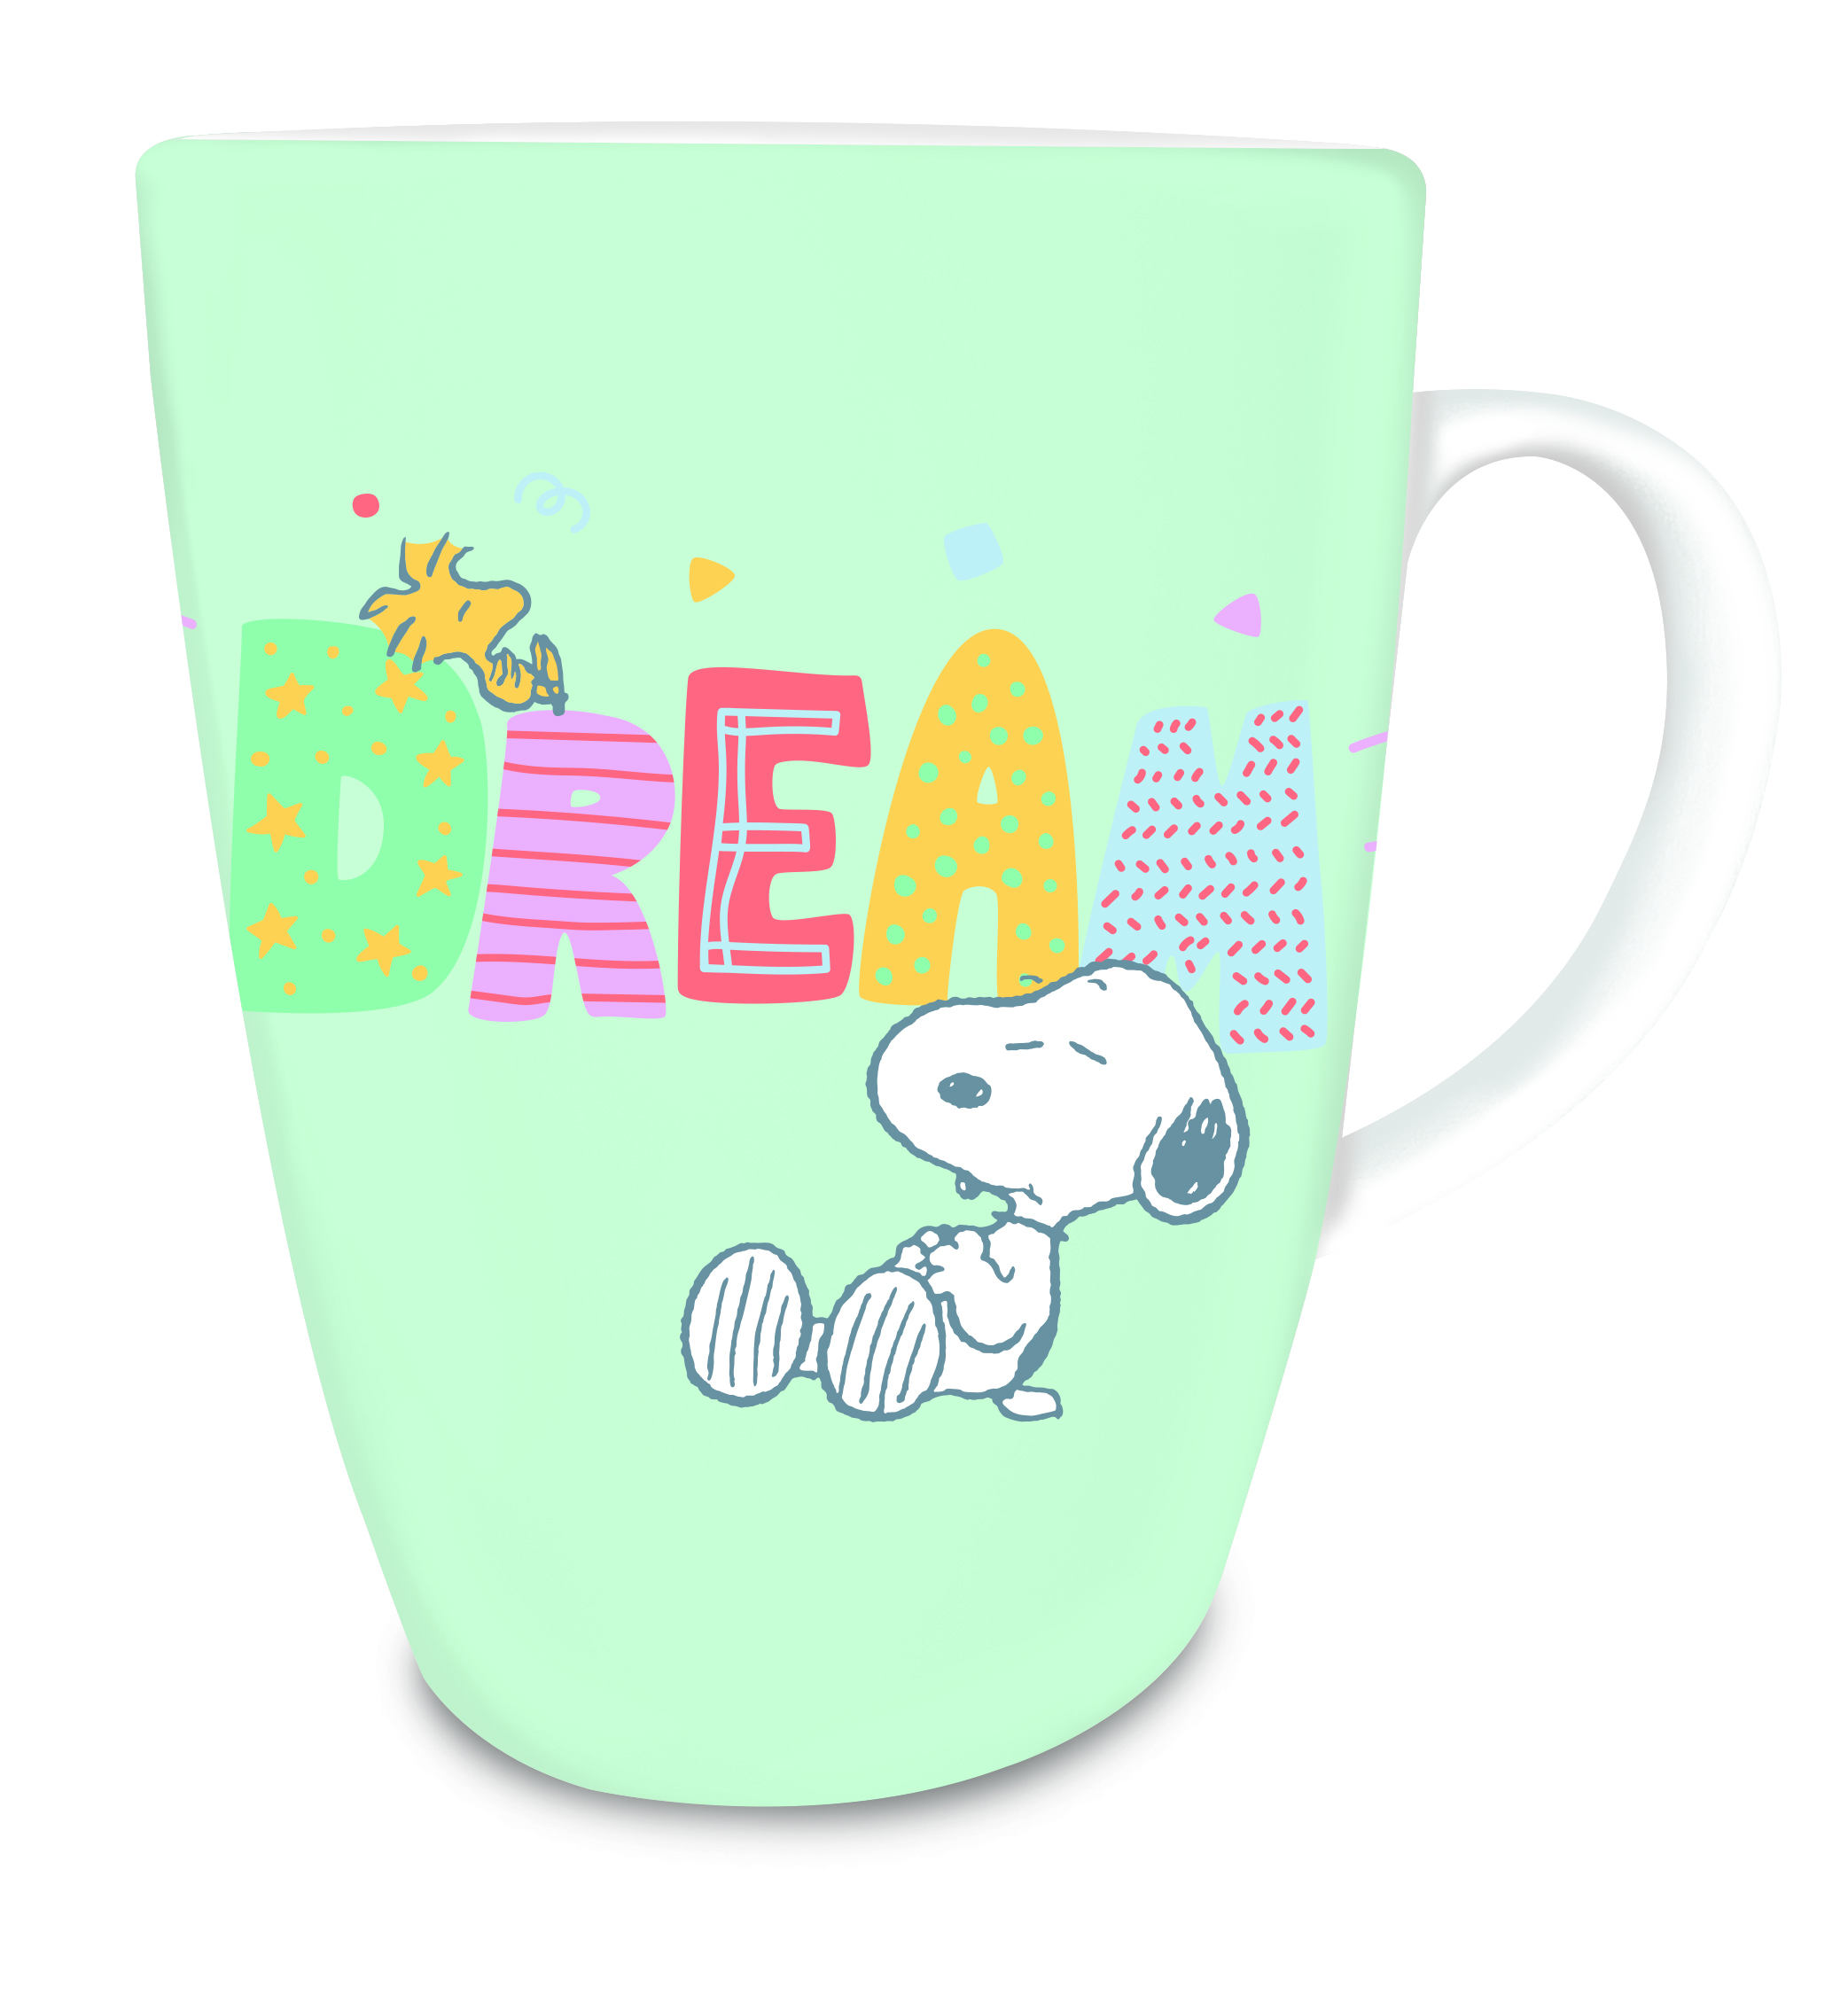 Get a free limited edition Peanuts Snoopy Cup with purchase of Darlie toothpastes - 2